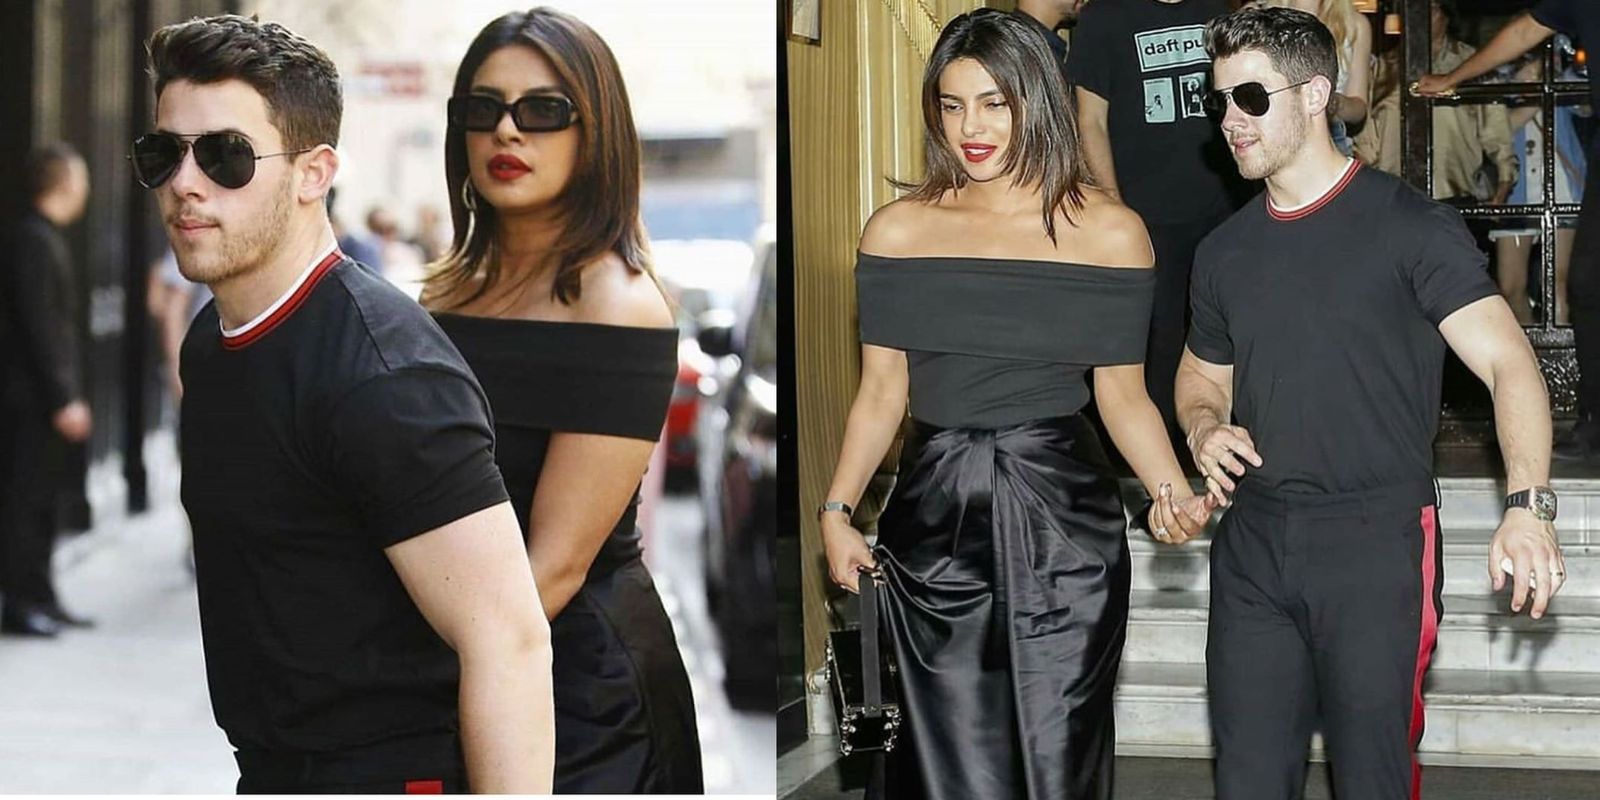 Priyanka Chopra And Nick Jonas Spotted Twinning In Black As They Go Out For Dinner In Paris!